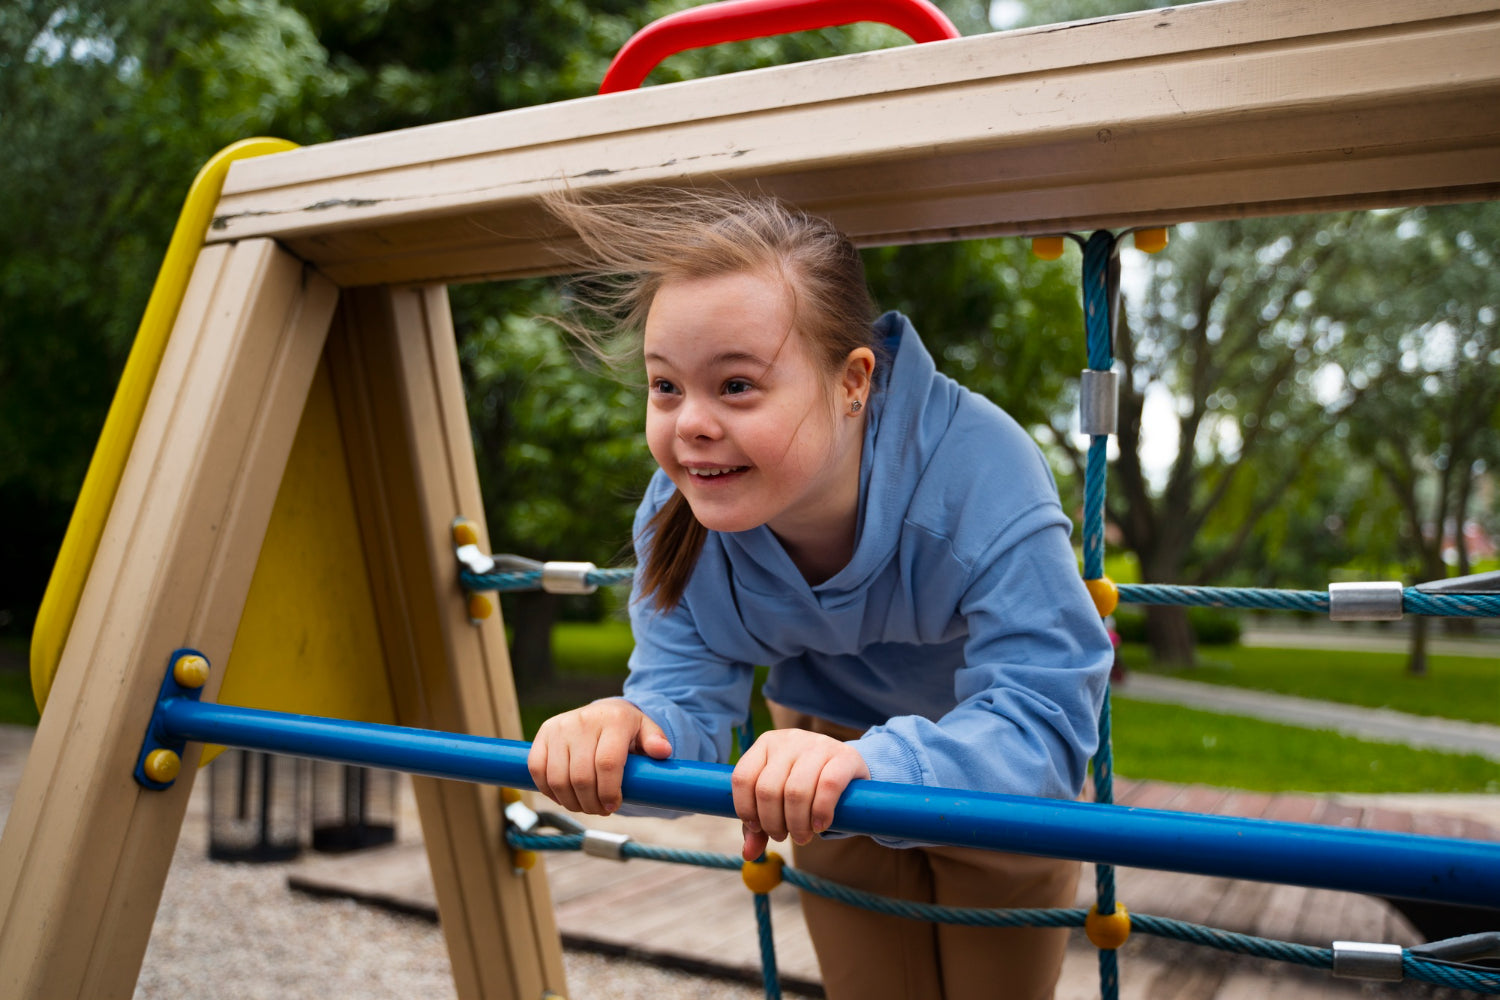 10 benefits of Play Based Learning for Students with Special Needs